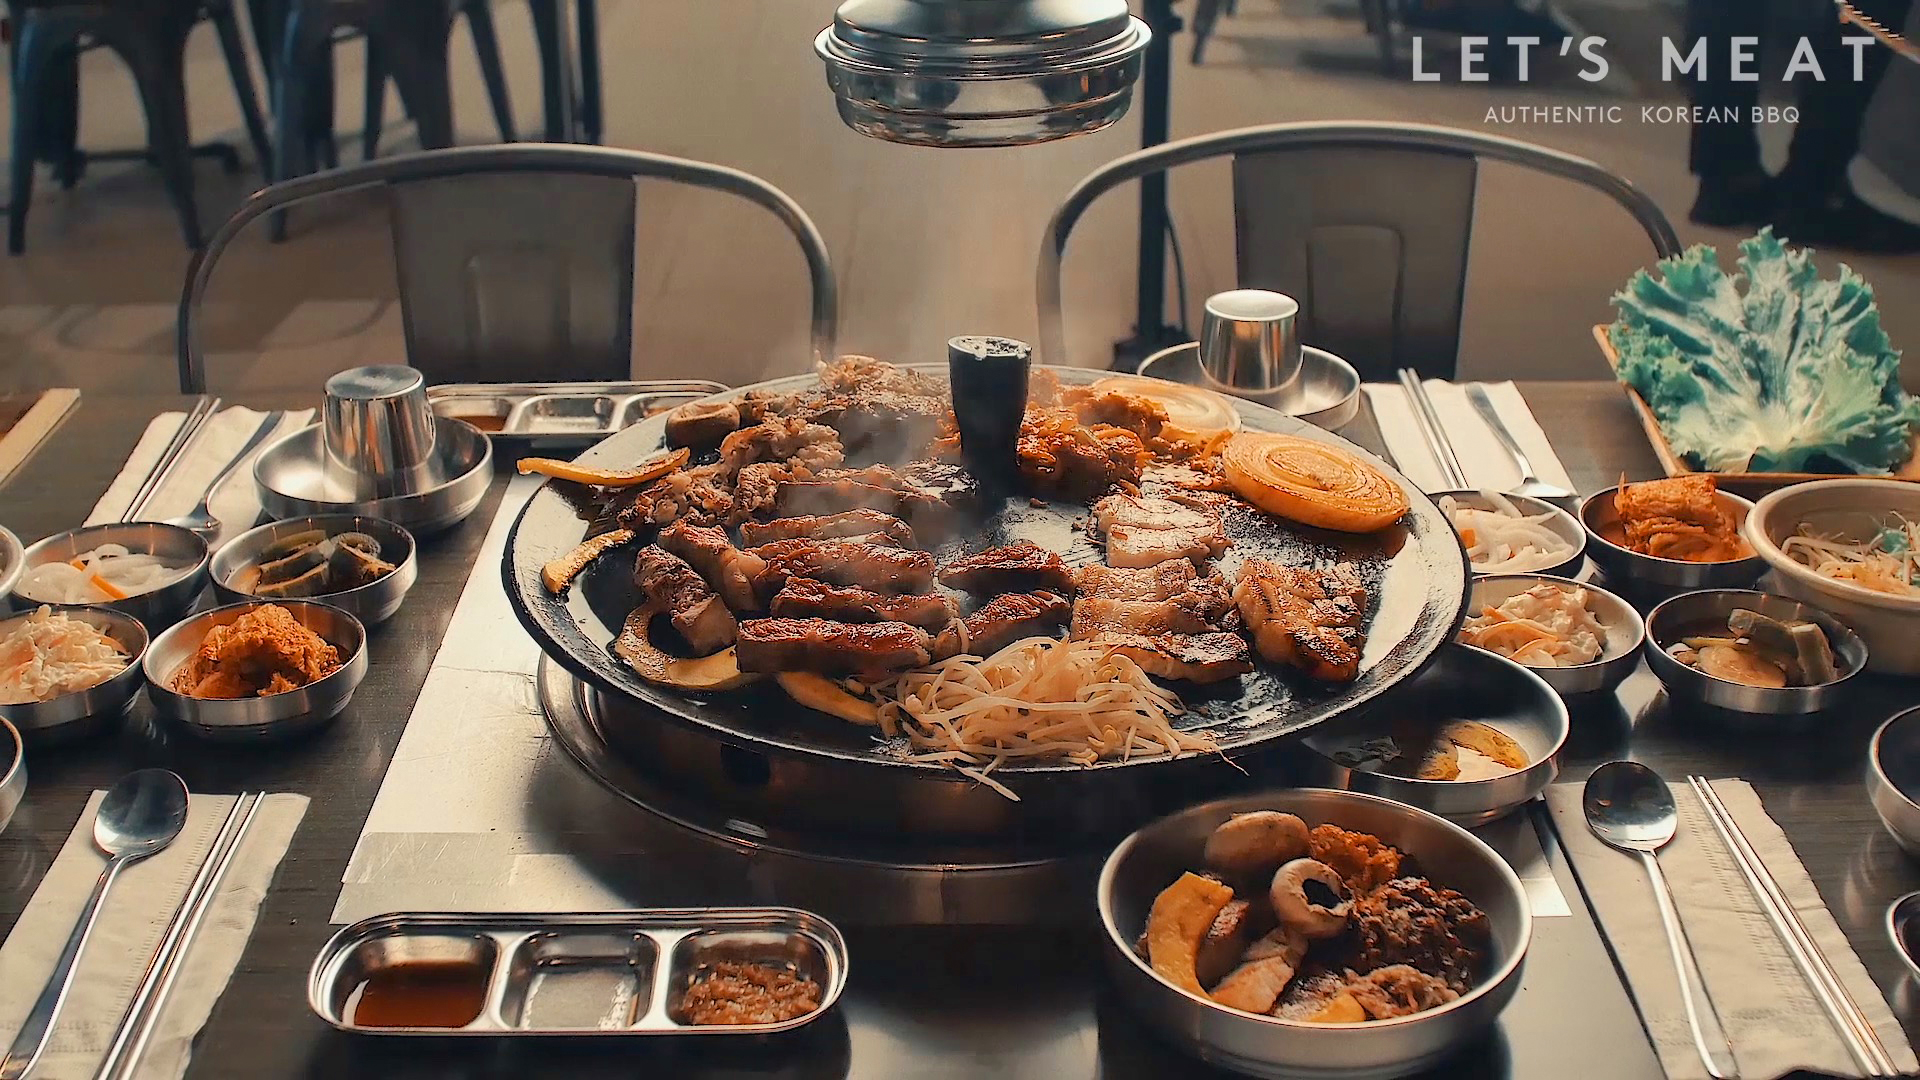 Let's Meat BBQ | All You Can Eat Korean BBQ Buffet | AYCE